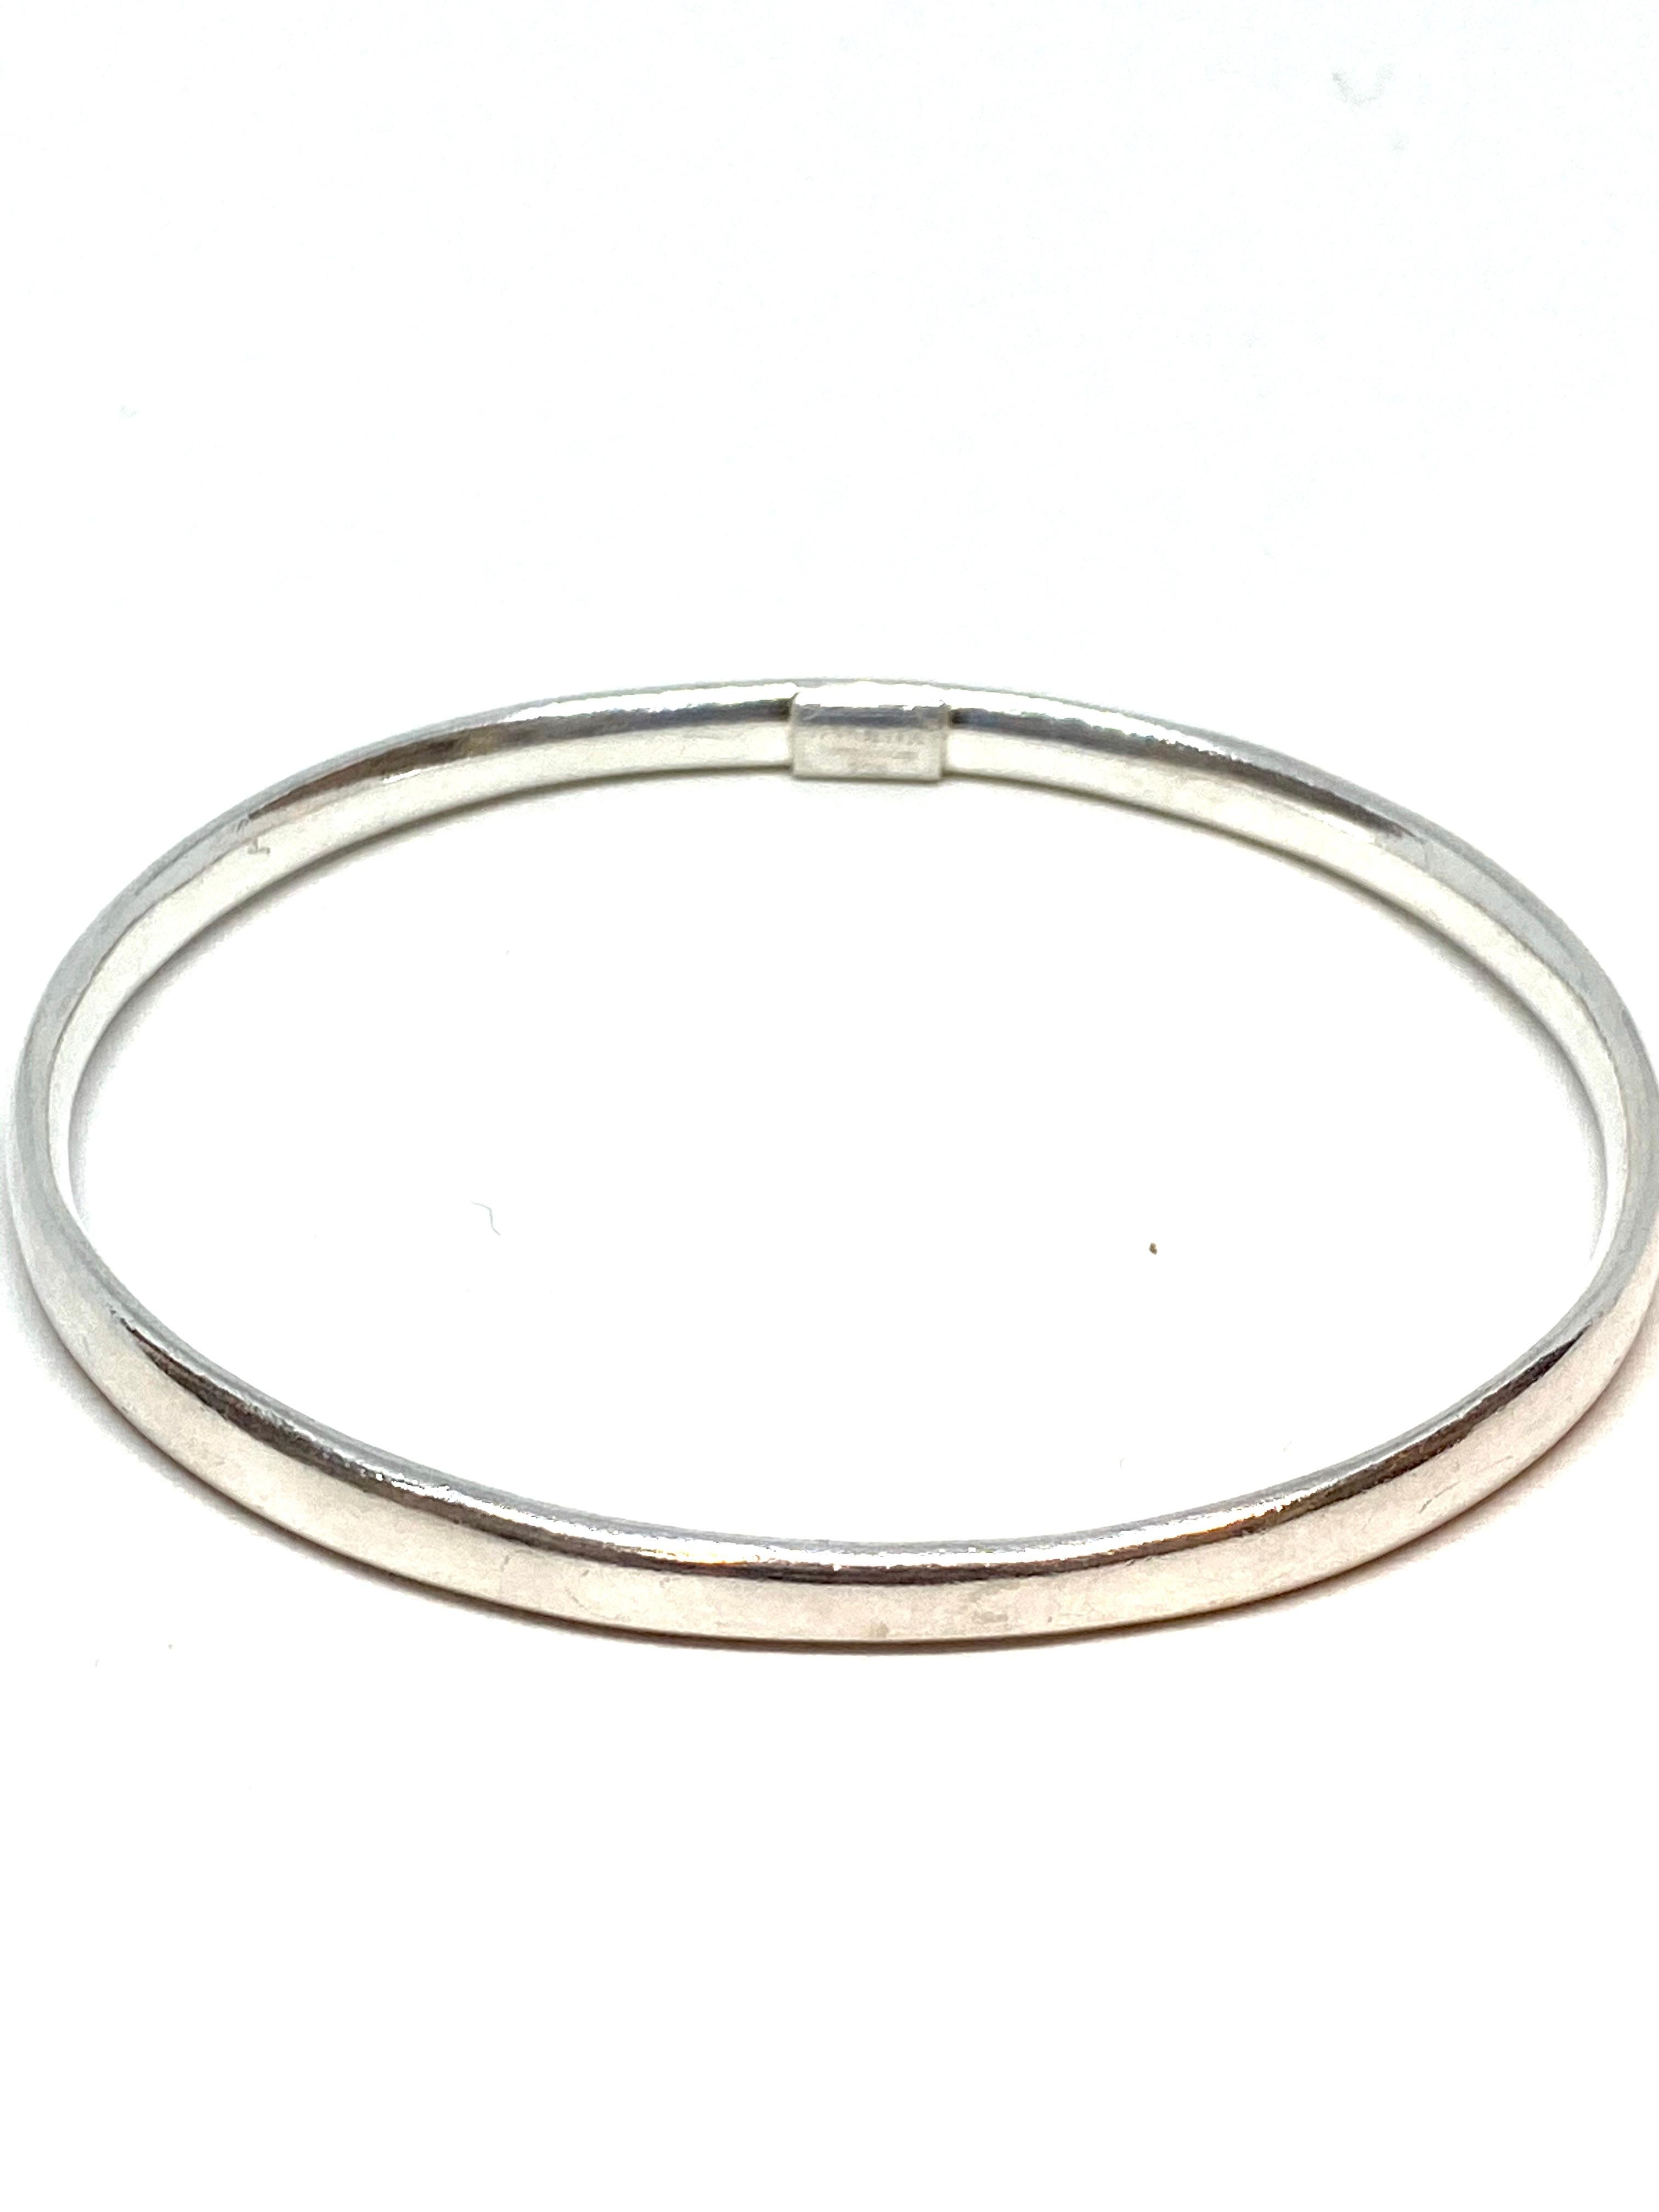 This 5.20 MM slim bangle bracelet, made of sterling silver, is the perfect way to elevate your everyday look.
- Sterling silver thin bangle bracelet
The shape in convex or rounded edged

- No clasp -- slips on over wrist
- Approx. 2.5